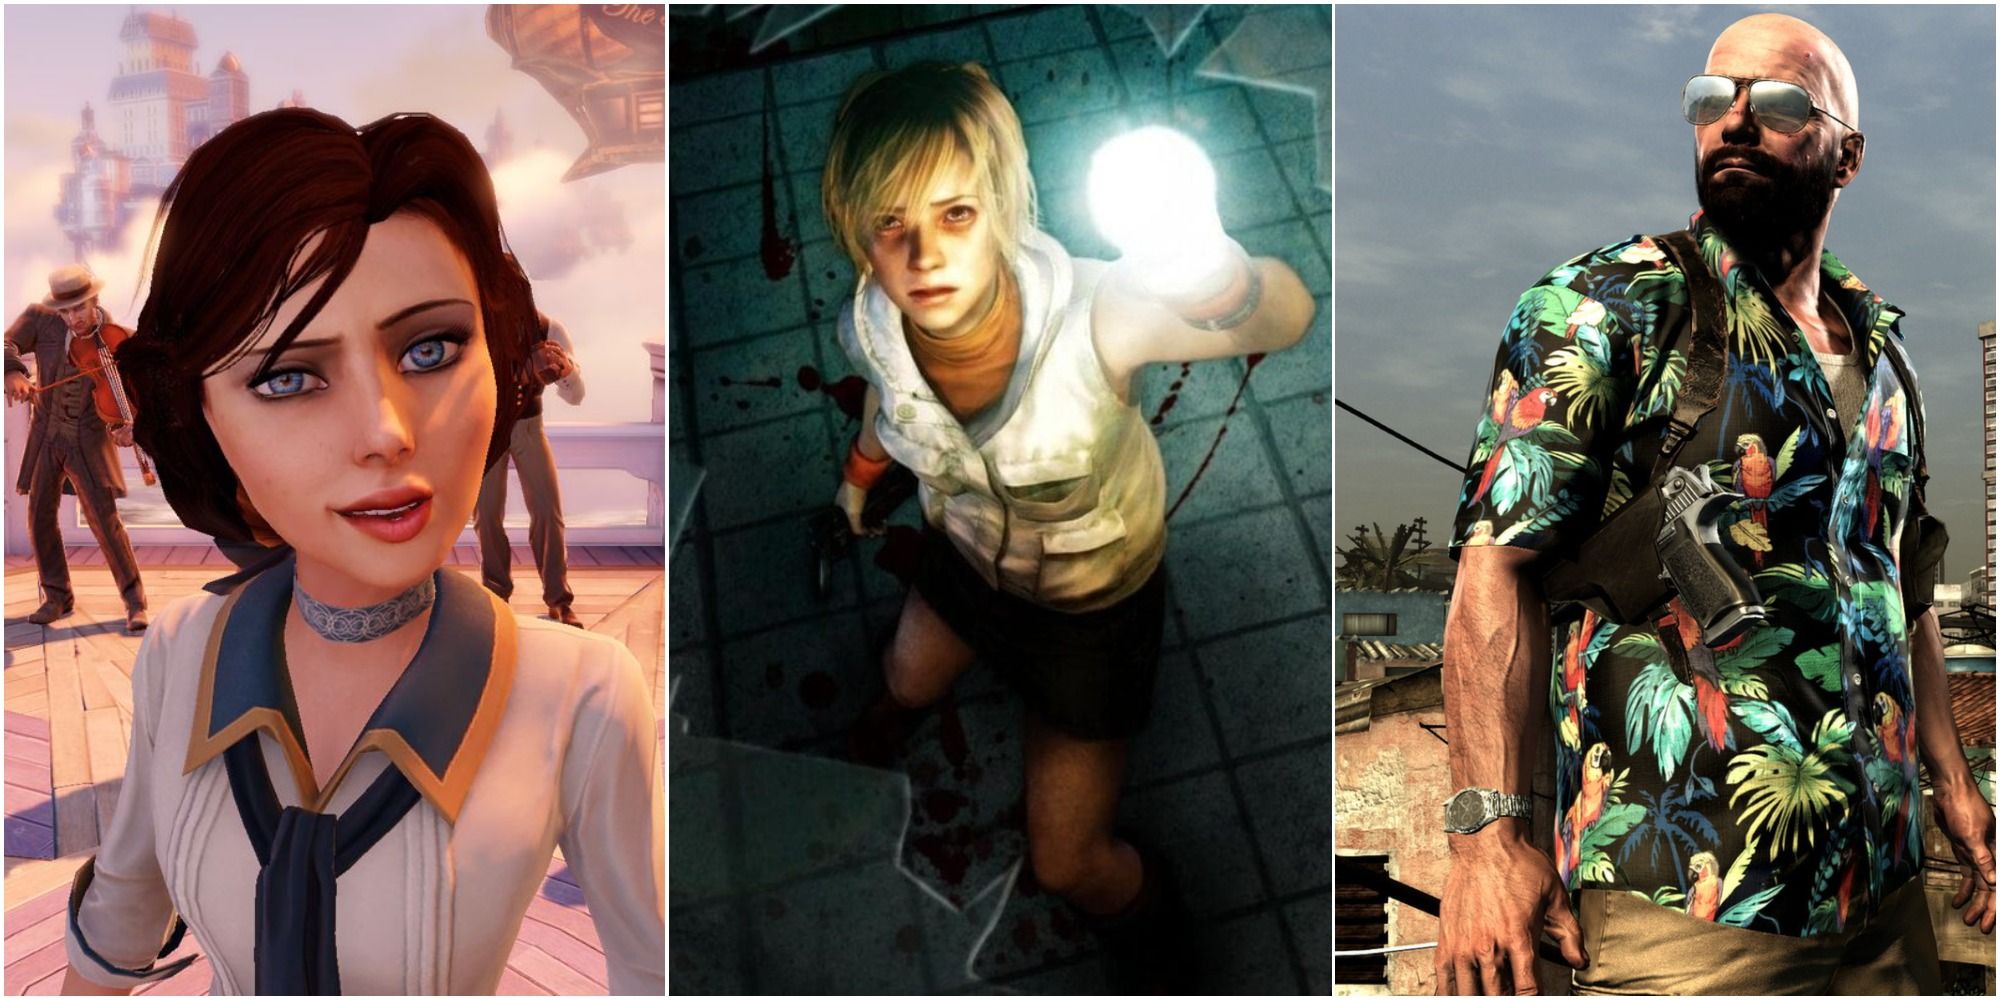 Game Settings Featured - Bioshock Infinite, Silent Hill 3, Max Payne 3